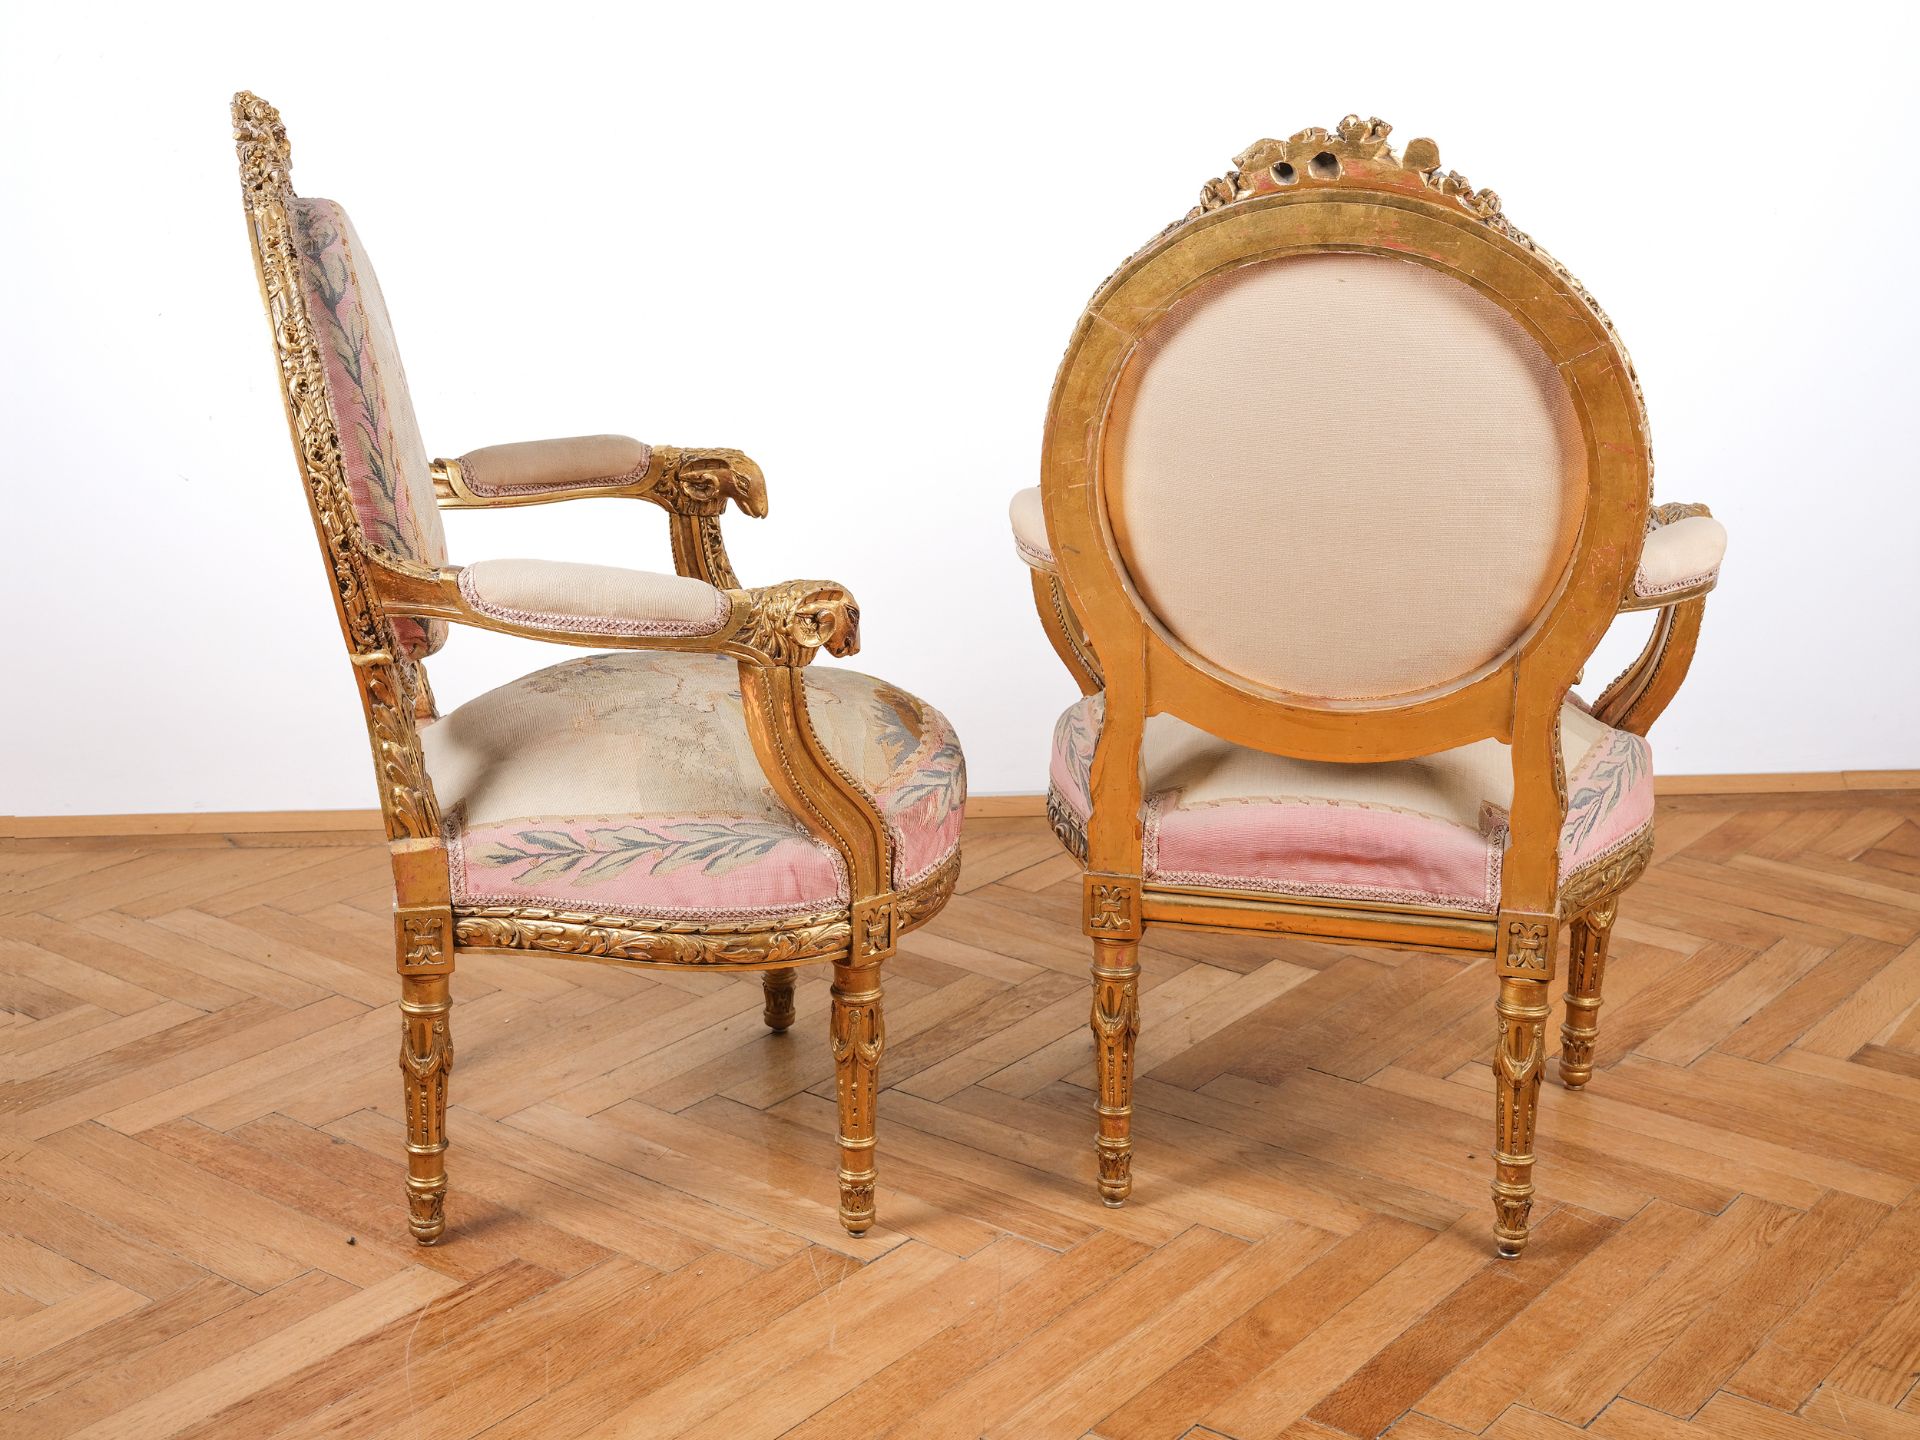 Five-piece seating set: 1 bench & 4 armchairs, Louis XVI style around 1900 - Image 6 of 8